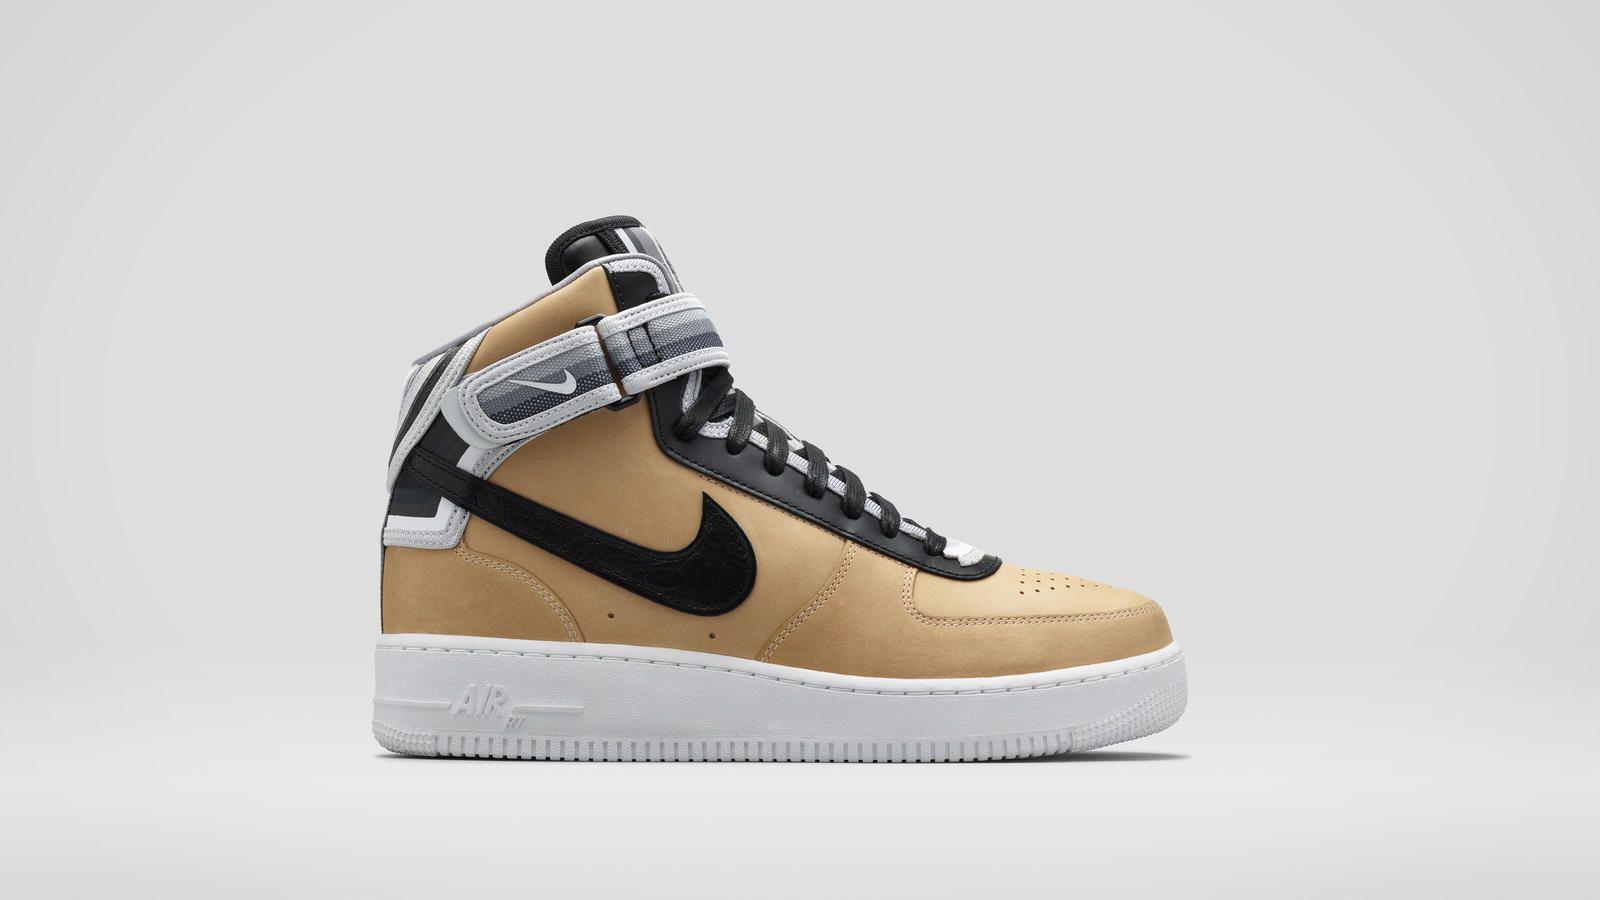 Nike Shoes with the Triangle Logo - Triangle Offense: The Third And Final Nike + R.T. Air Force 1